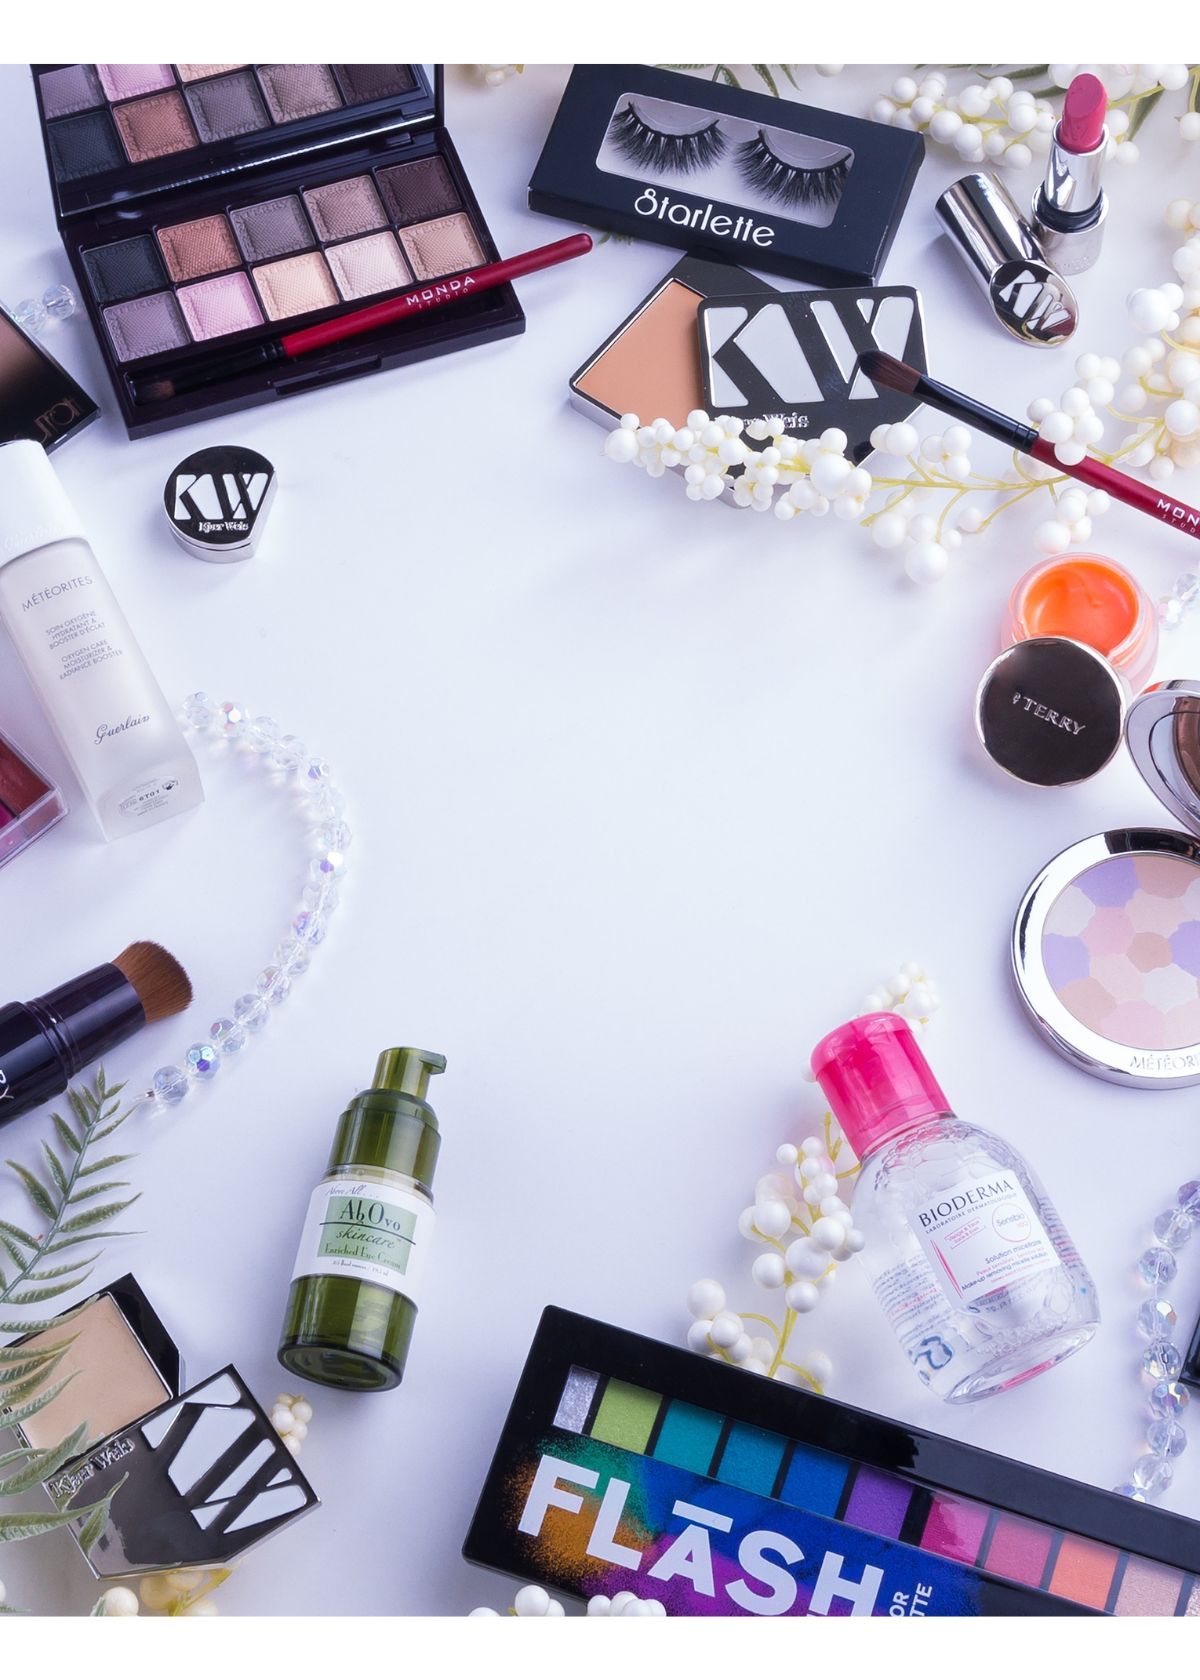 The Best Makeup Kits for Every Occasion